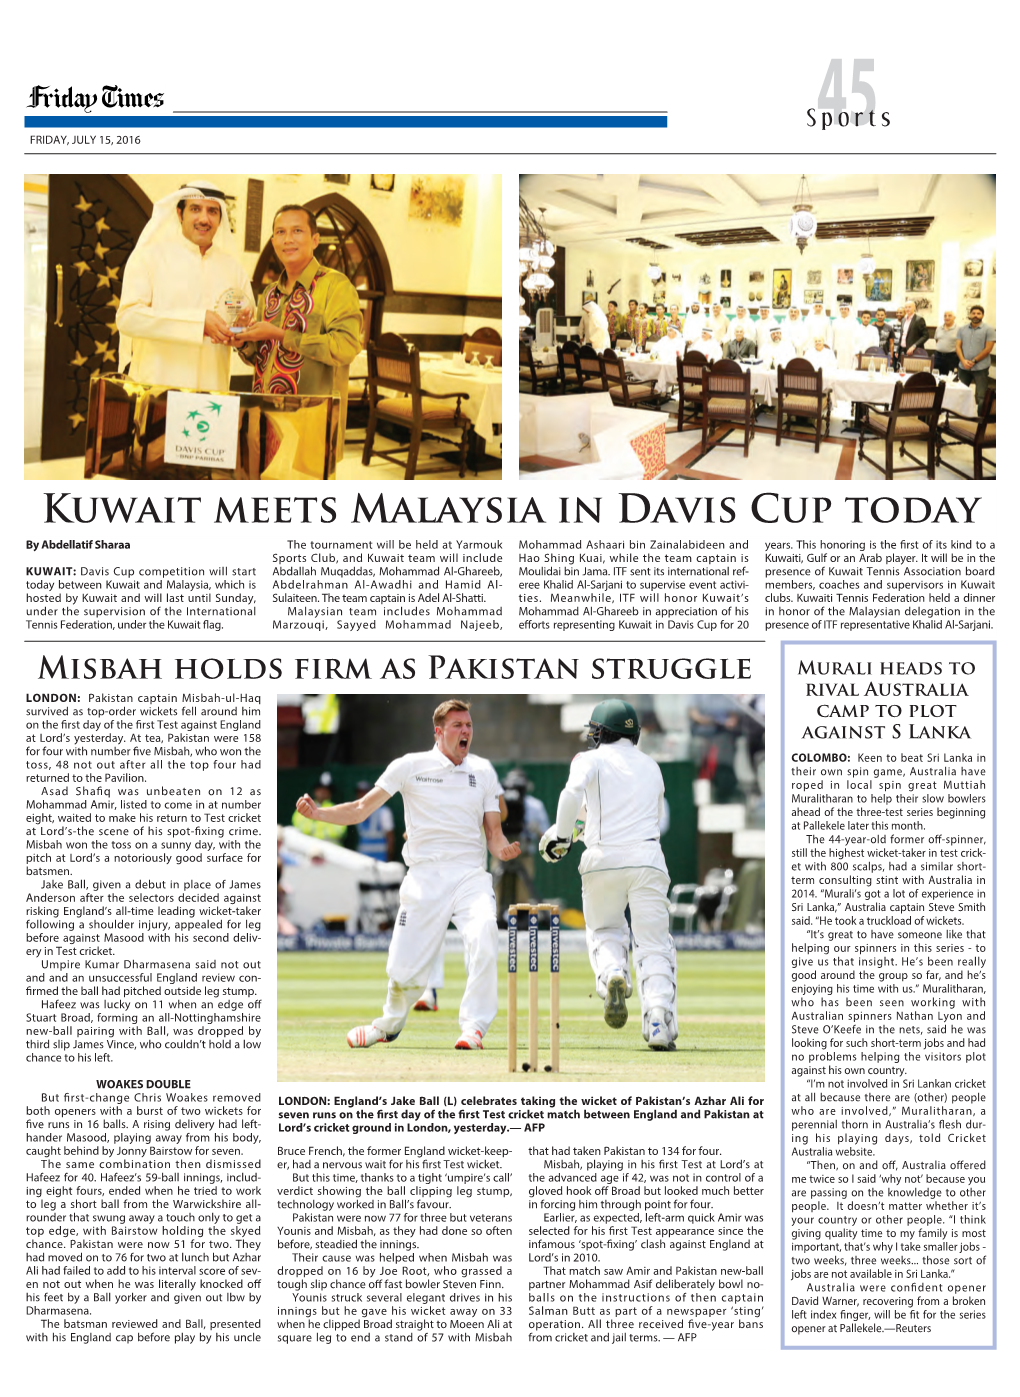 Kuwait Meets Malaysia in Davis Cup Today